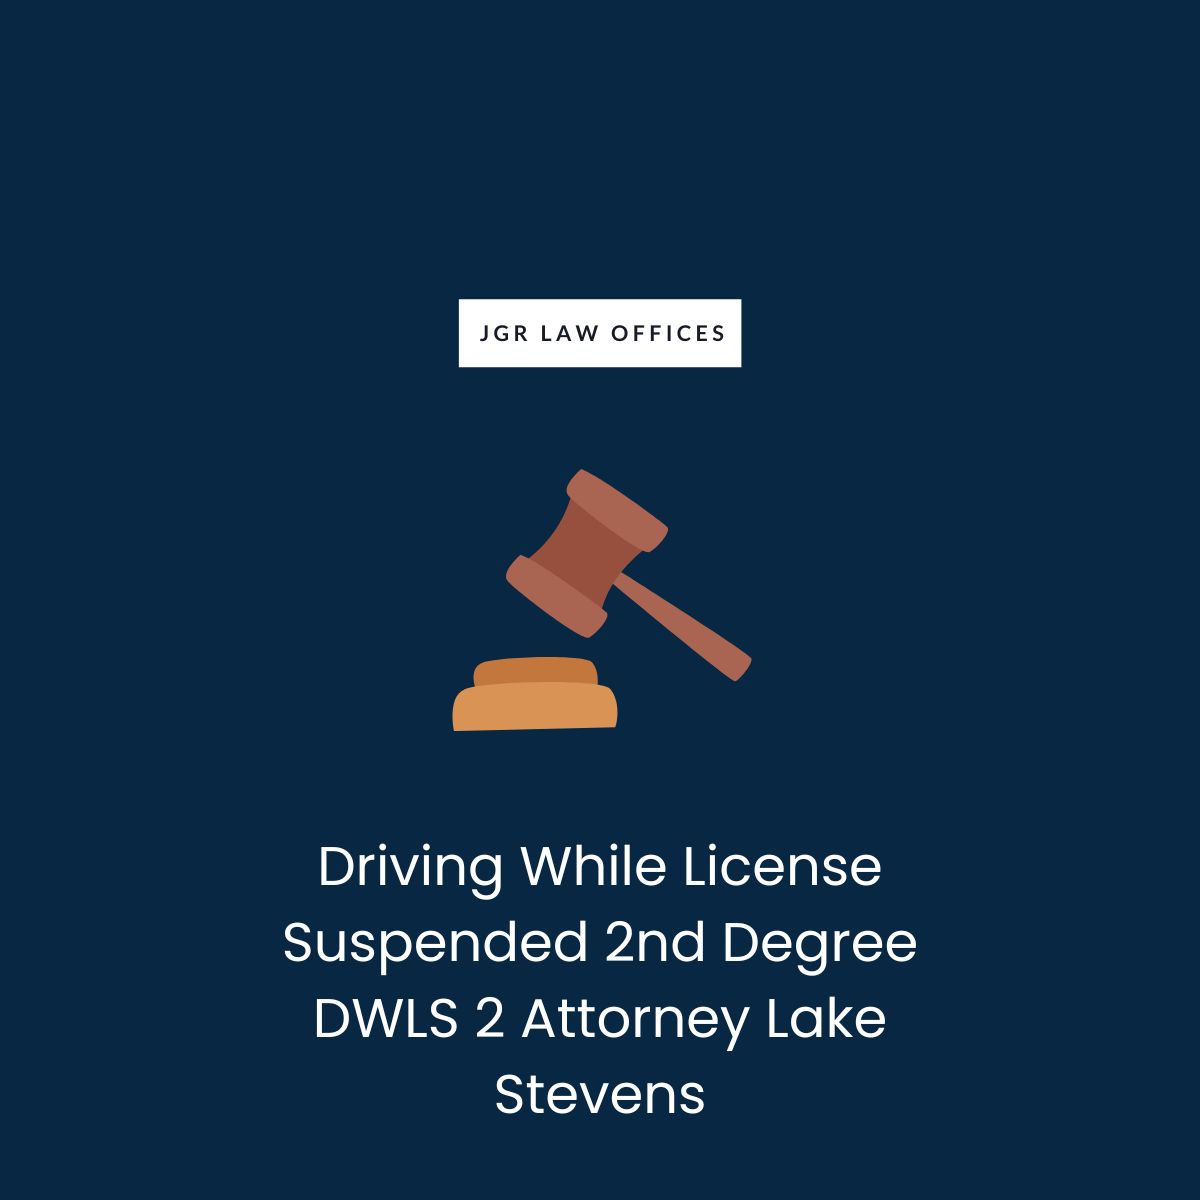 Driving While License Suspended 2nd Degree DWLS 2 Attorney Lake Stevens